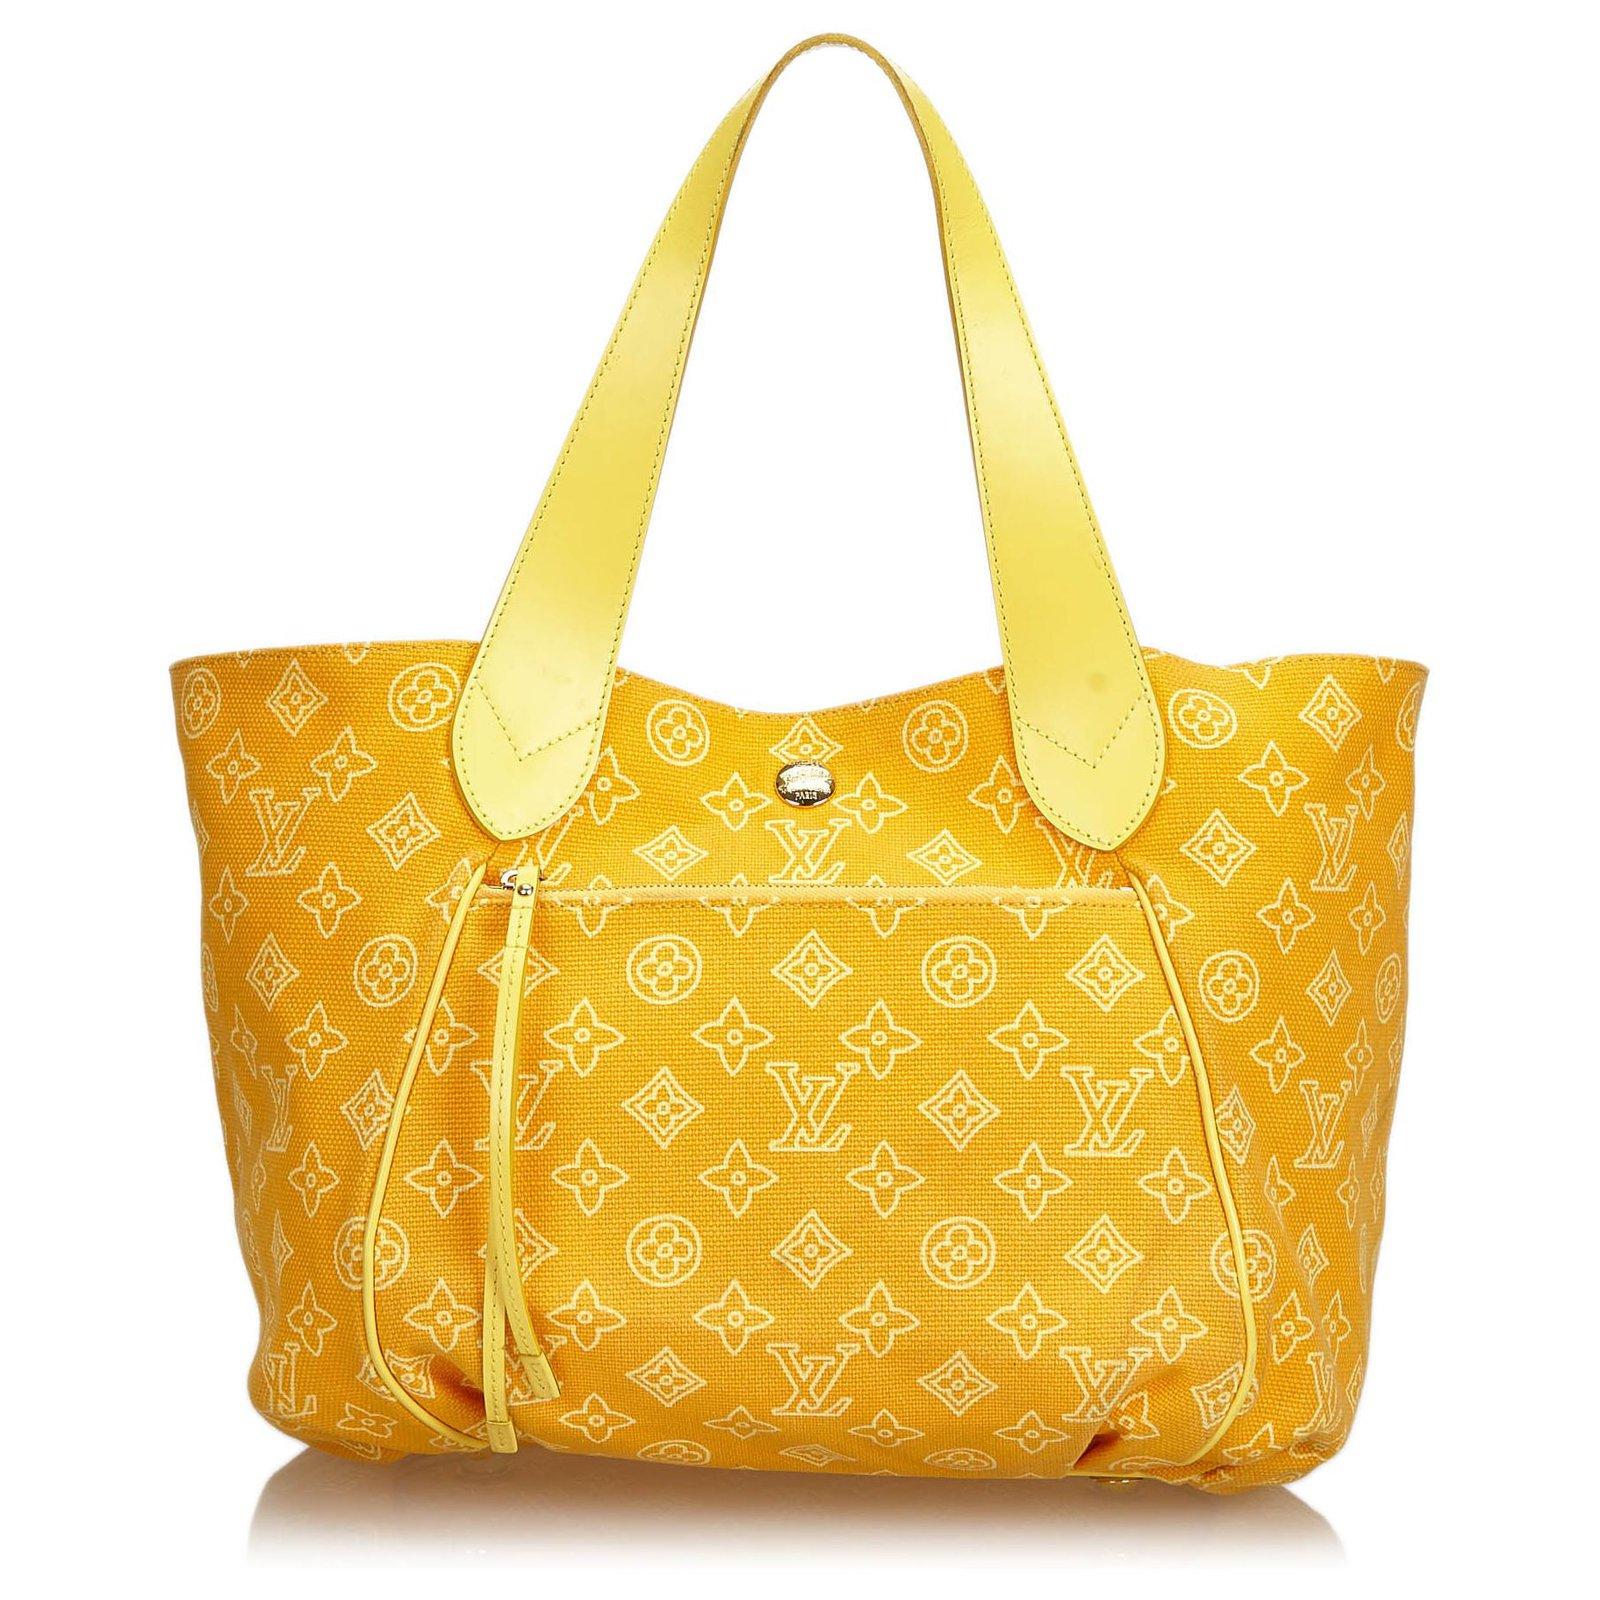 The Cabas Ipanema features a canvas body, exterior front zip pocket, flat leather straps, open top with hook closure, and interior zip pockets. 
The must-have tote for Summer 2009, Cabas Ipanema combines comfort and versatility, it would sure look